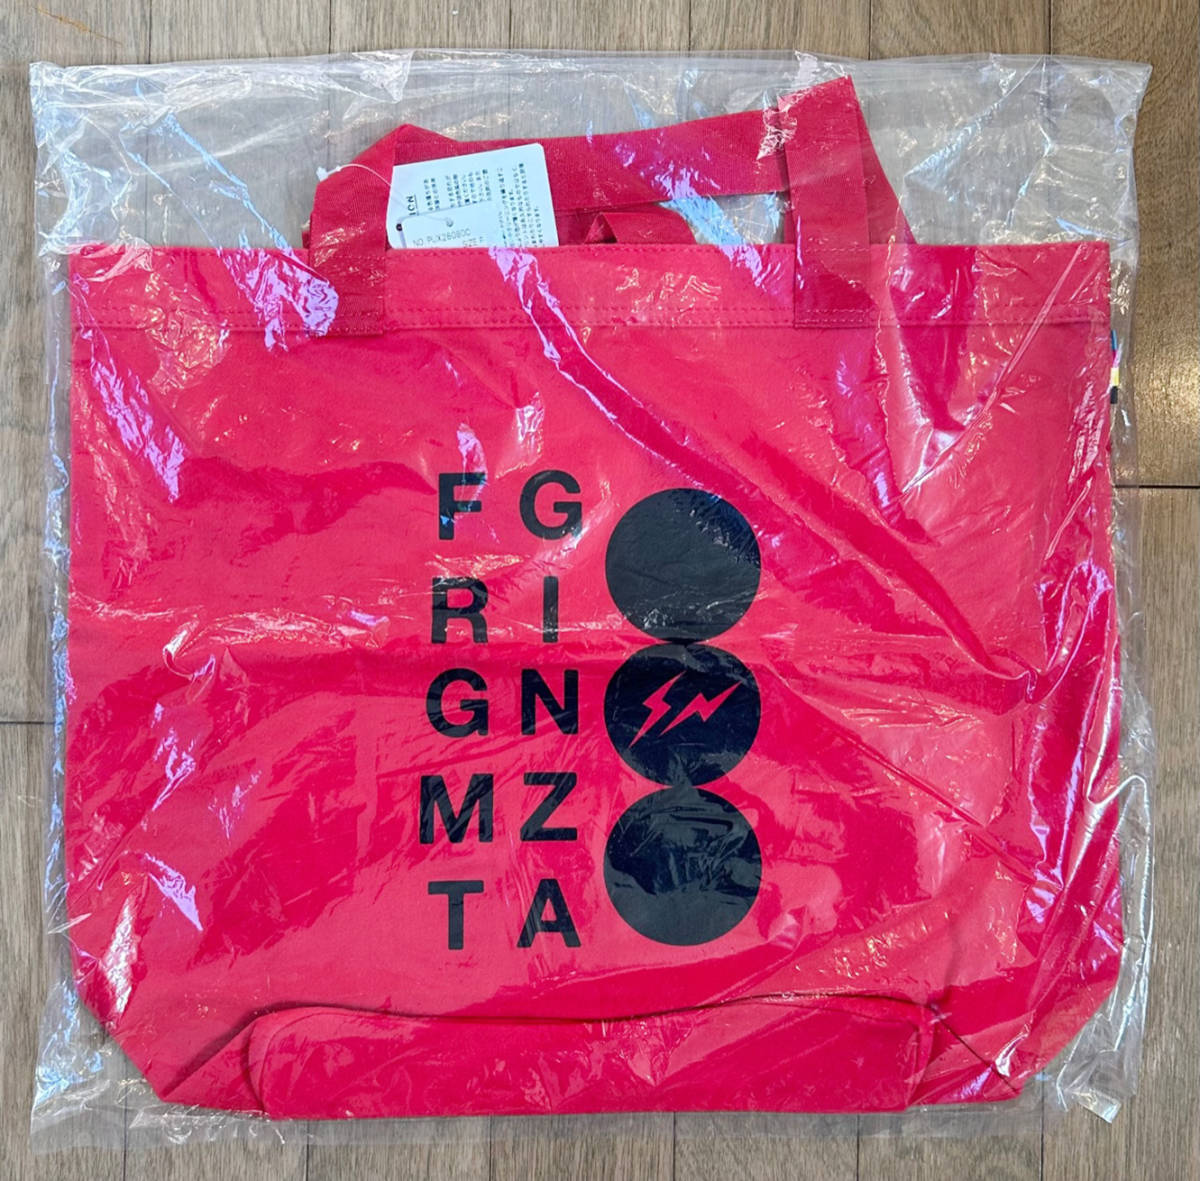 ■THE CONVINI × FRAGMENT 新品未開封 GINZA TOTE BAG RED-F コンビニ フラグメント 藤原ヒロシ トートバッグ